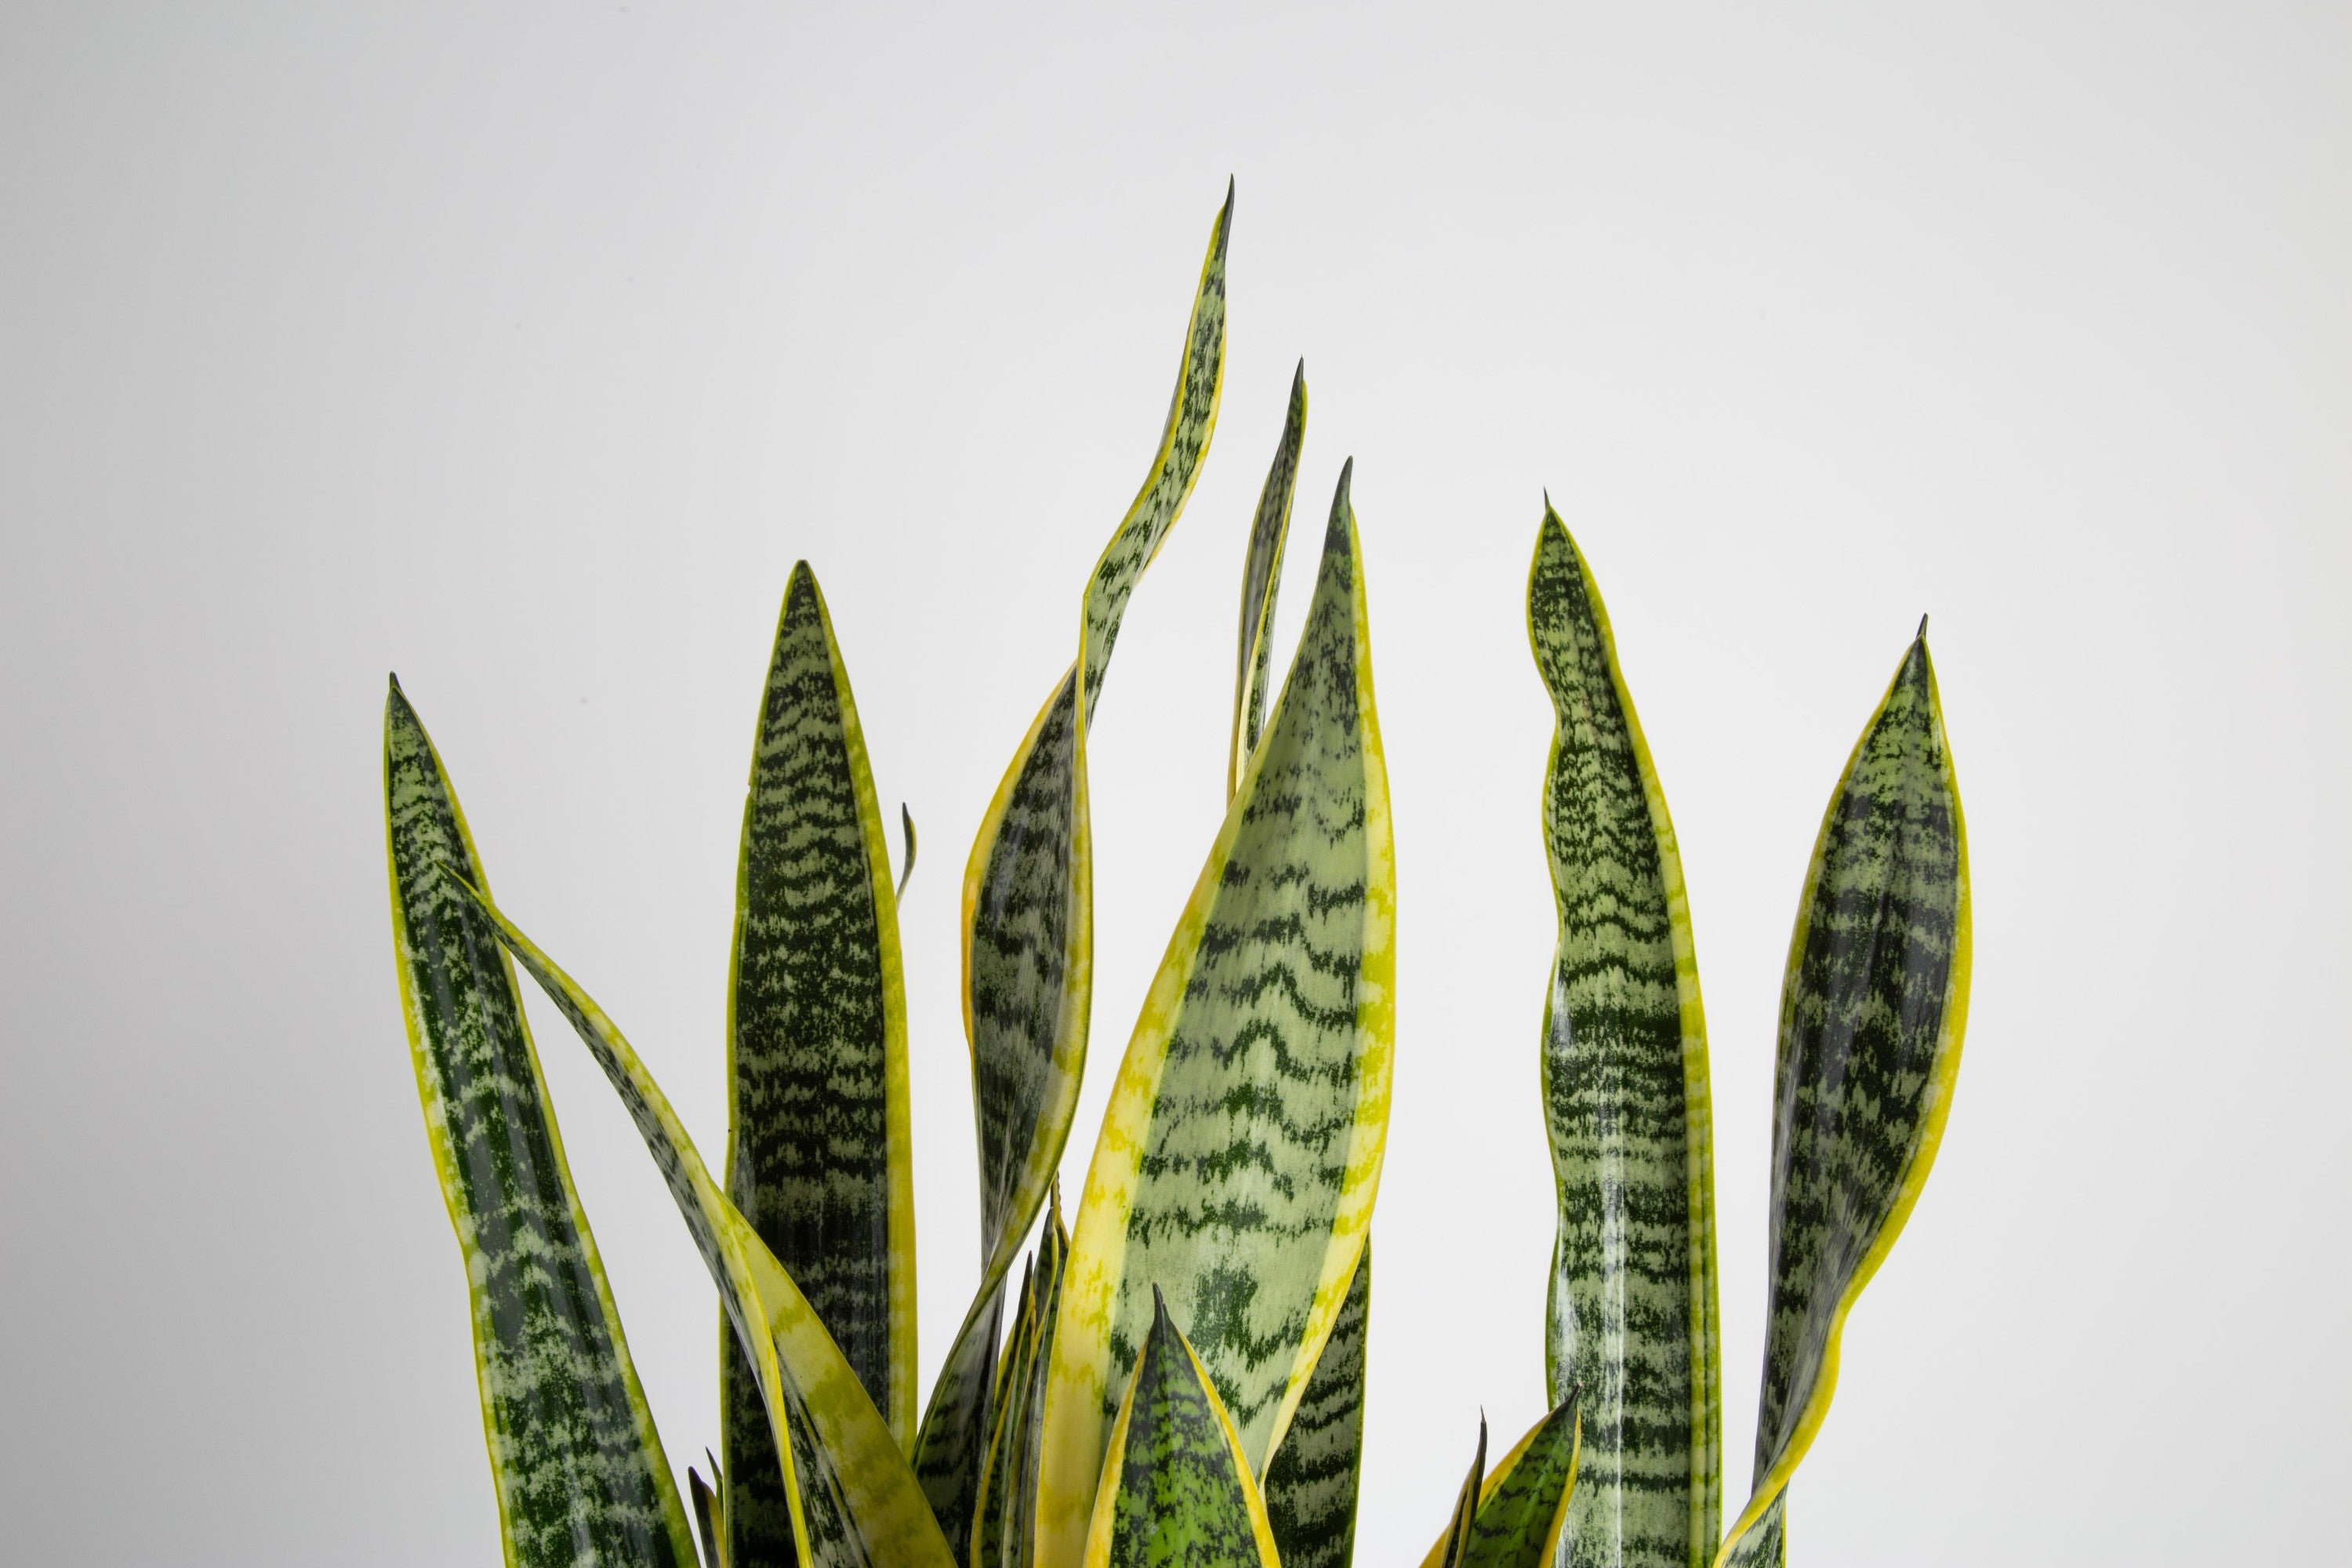 Costa Farms  Live Indoor 30in. Tall Green Snake Plant; Bright， Indirect Sunlight Plant in 10in. Mid-Century Modern Planter